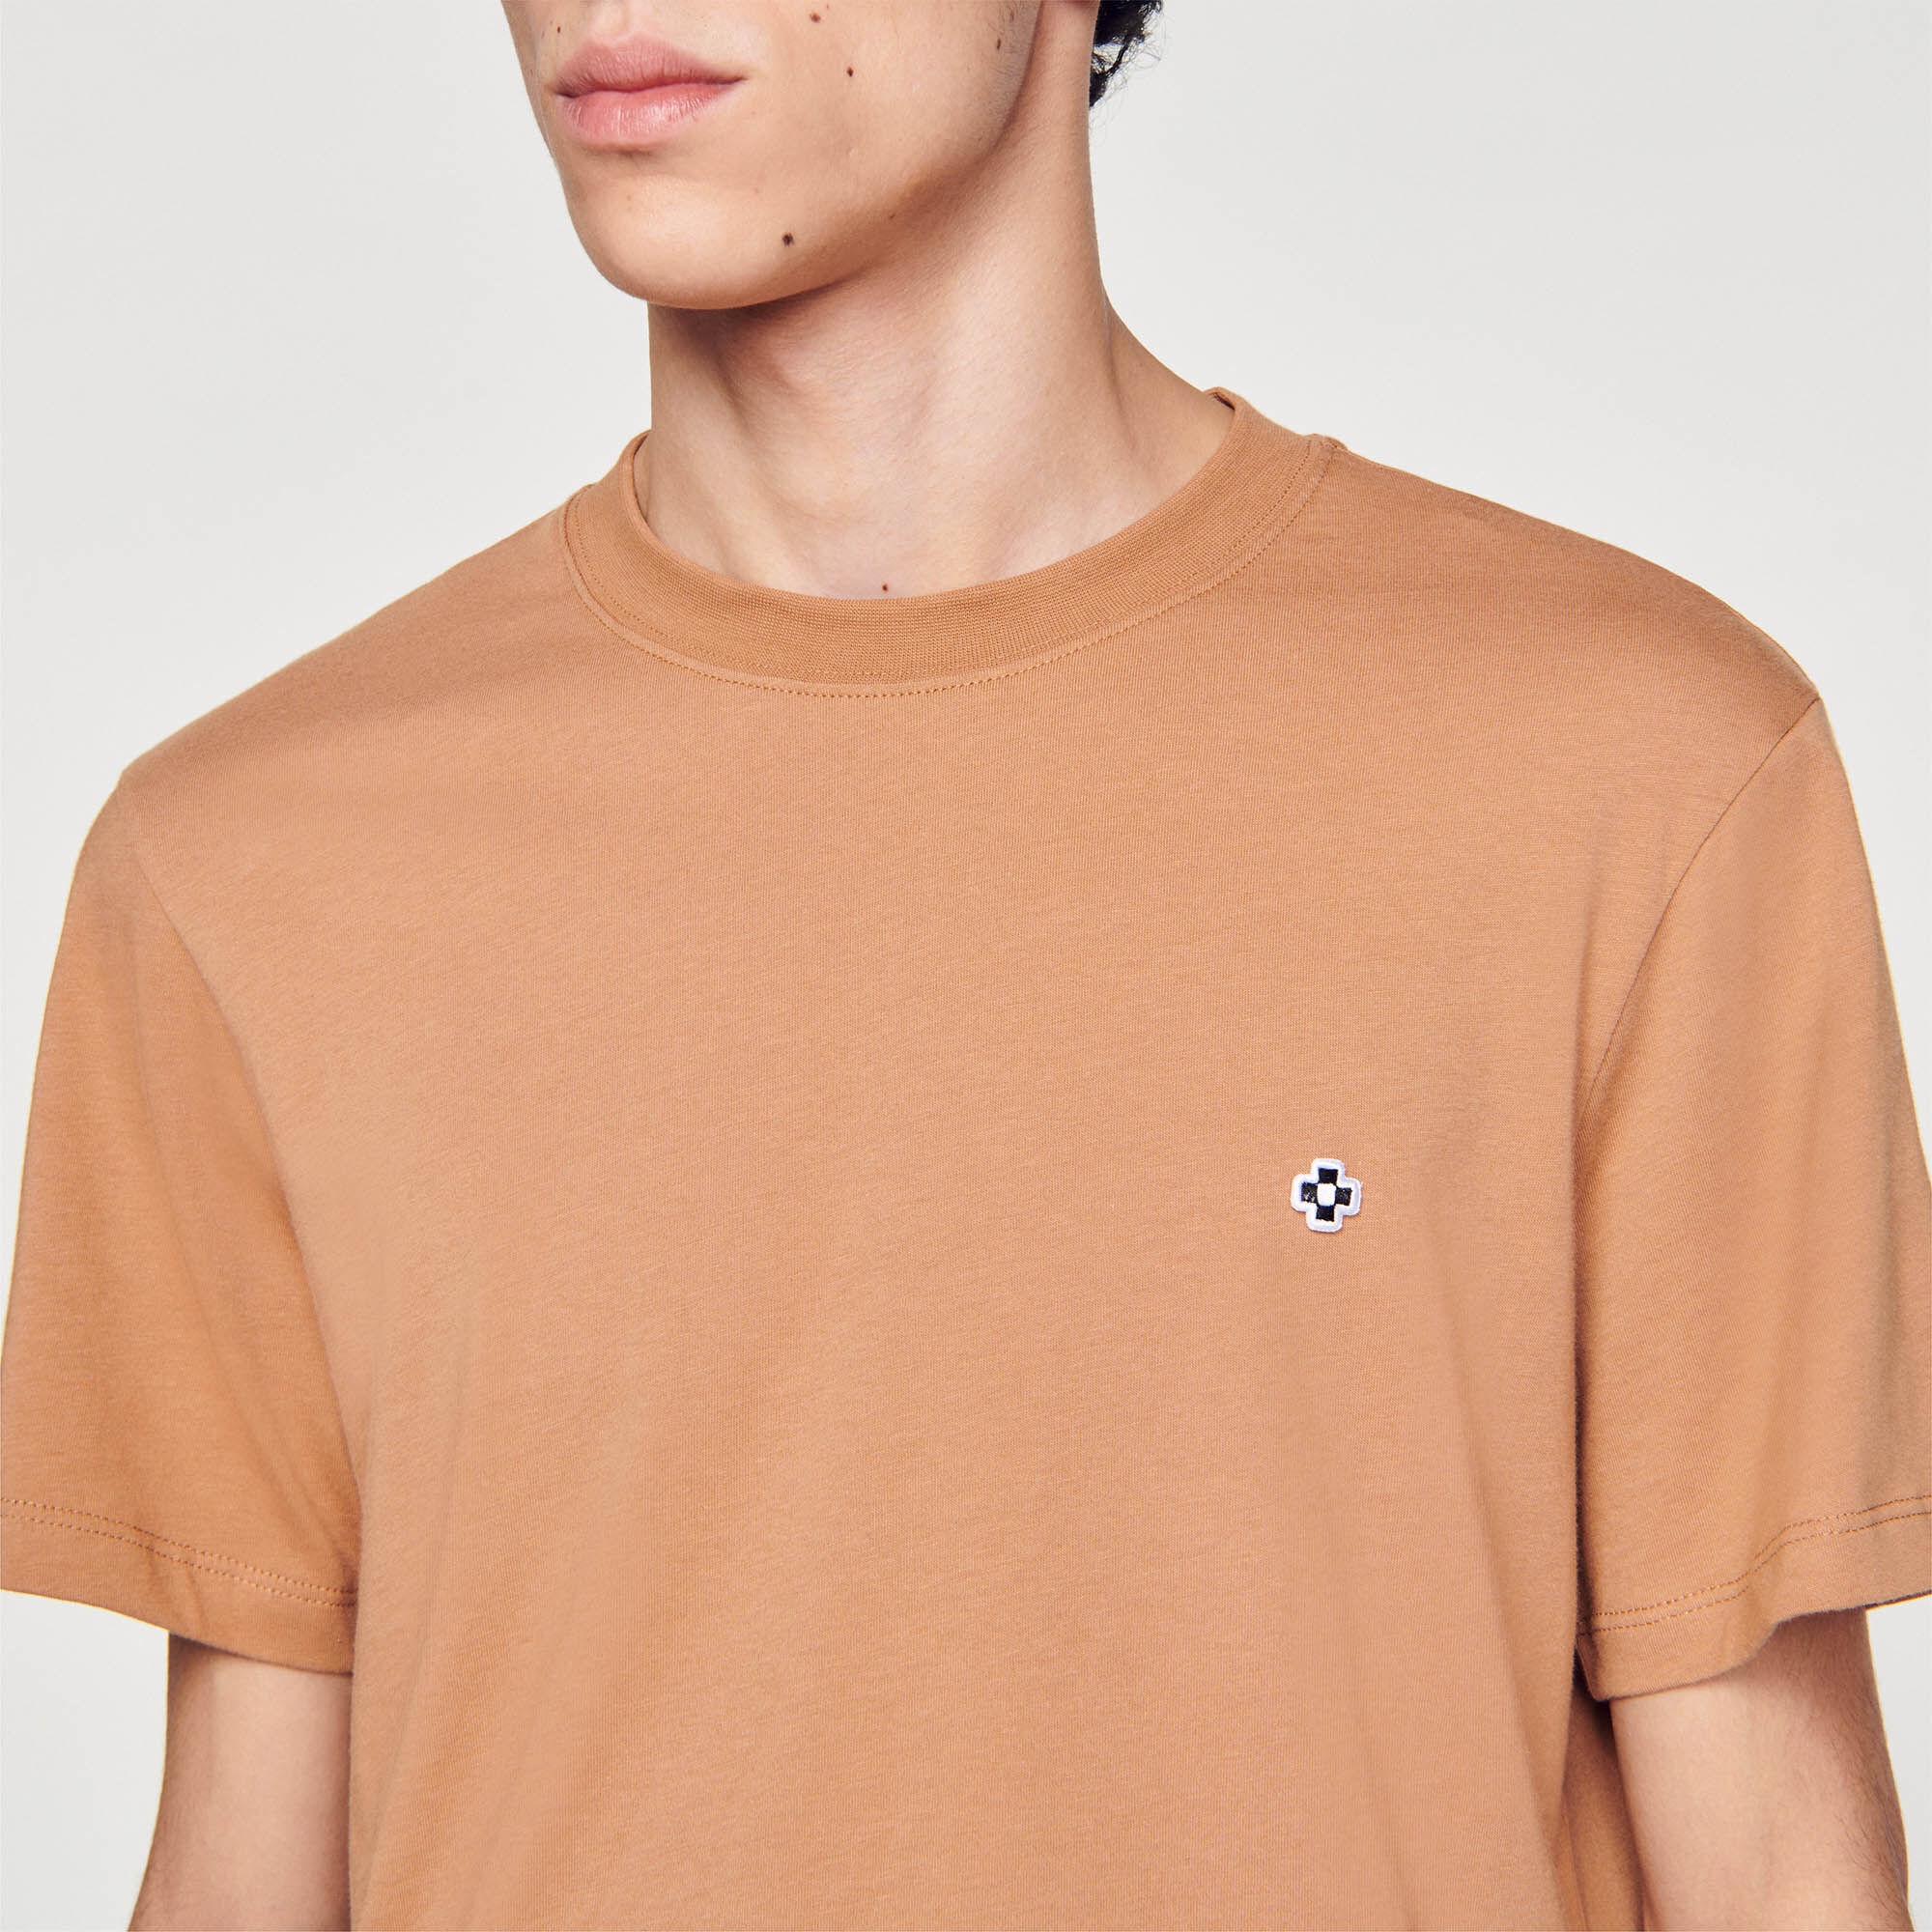 T-SHIRT WITH SQUARE CROSS PATCH - 4